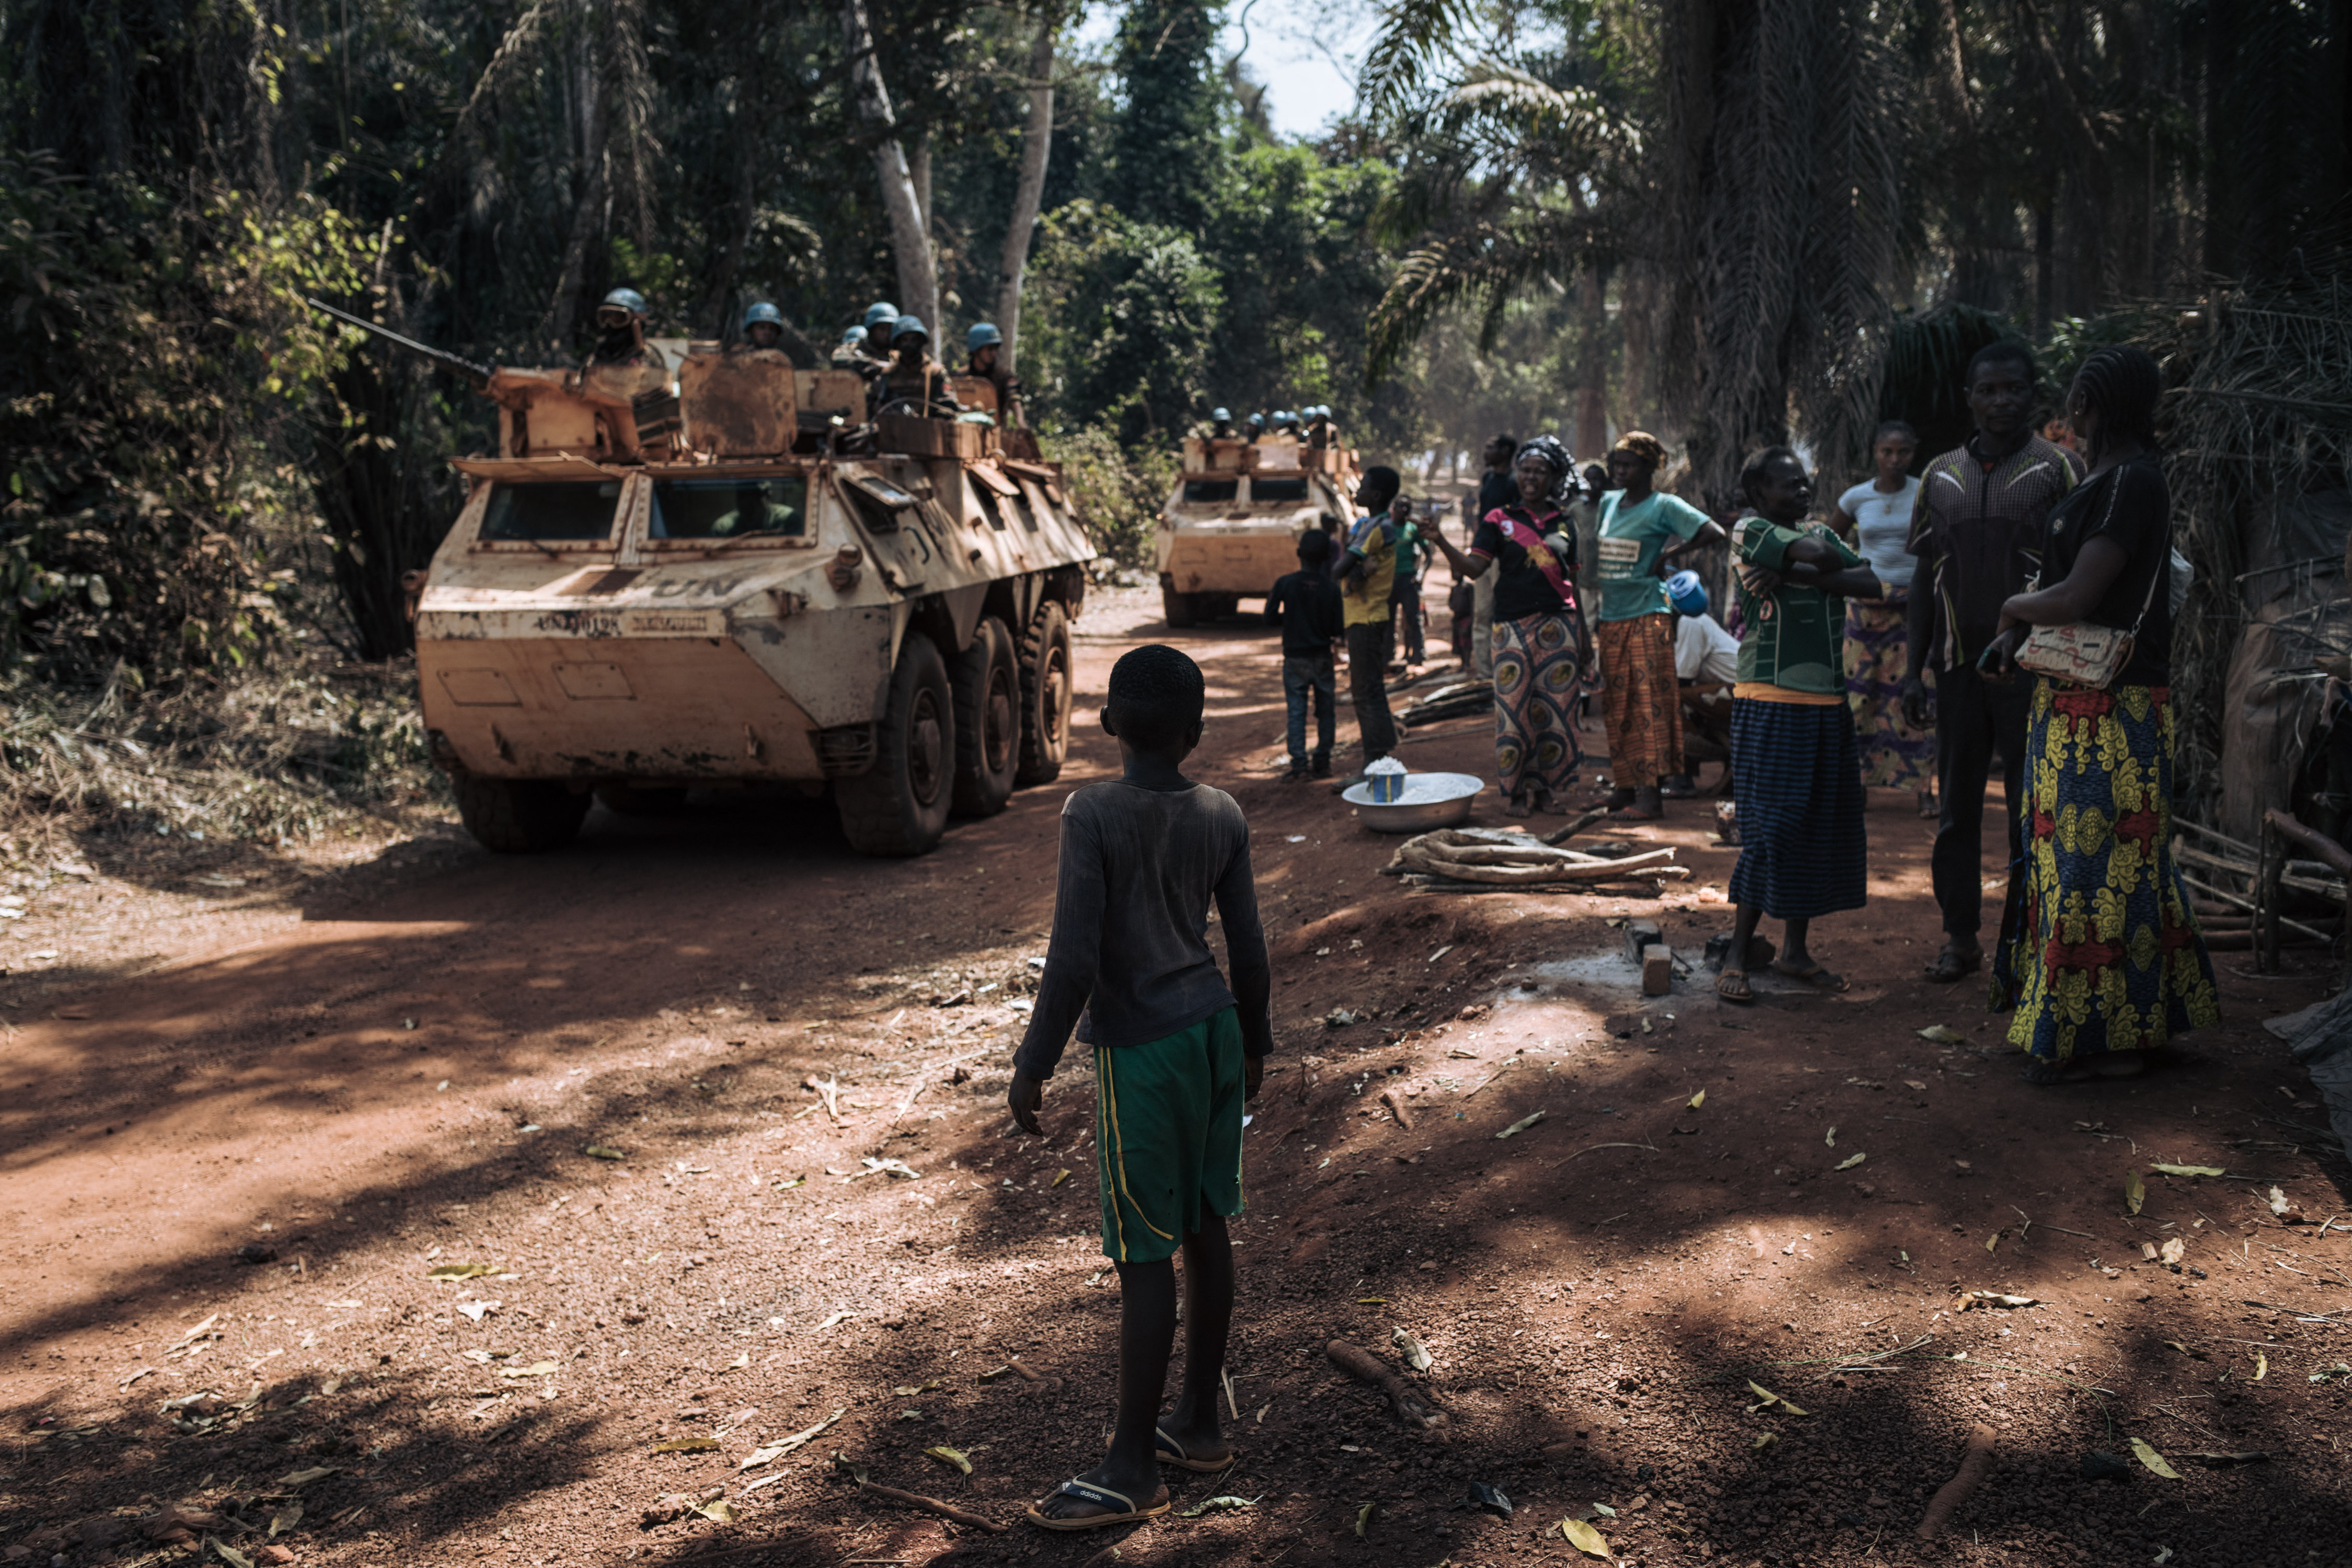 THE CENTRAL AFRICAN REPUBLIC IS BESET BY A CONTINUING CIVIL WAR. PHOTO: ALEXIS HUGUET / AFP